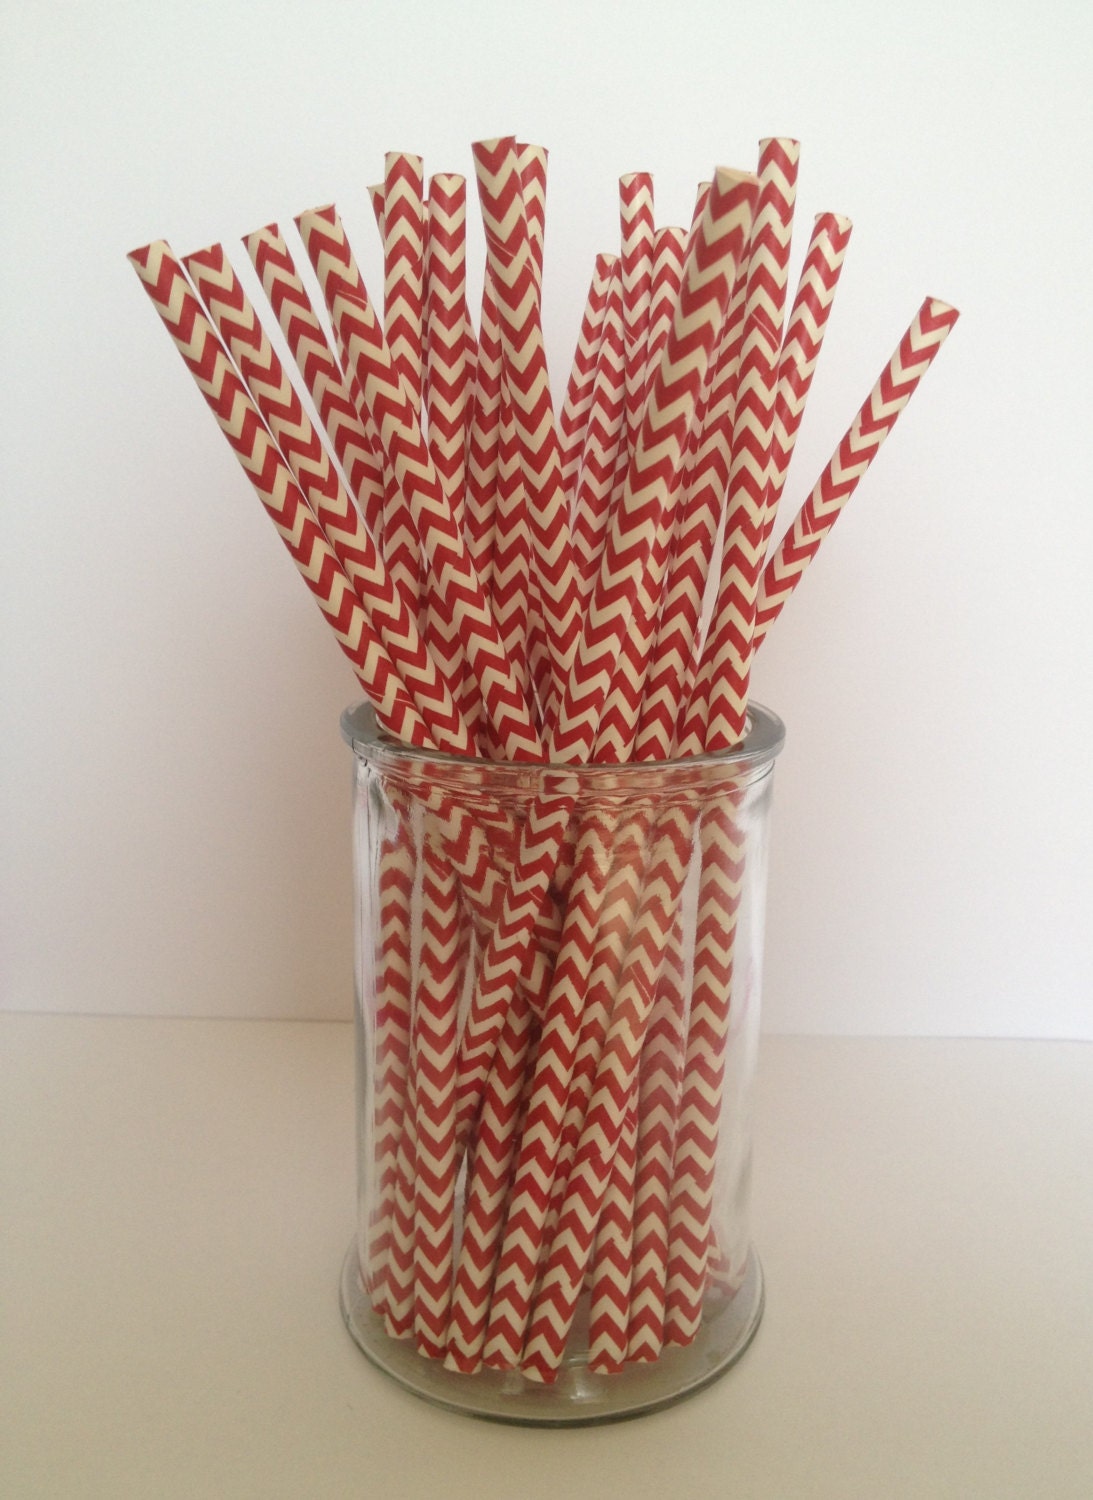 25 Red and White Chevron Pattern Paper Straws - Standard 7.75" or 19.68cm - CraftyCreations2012